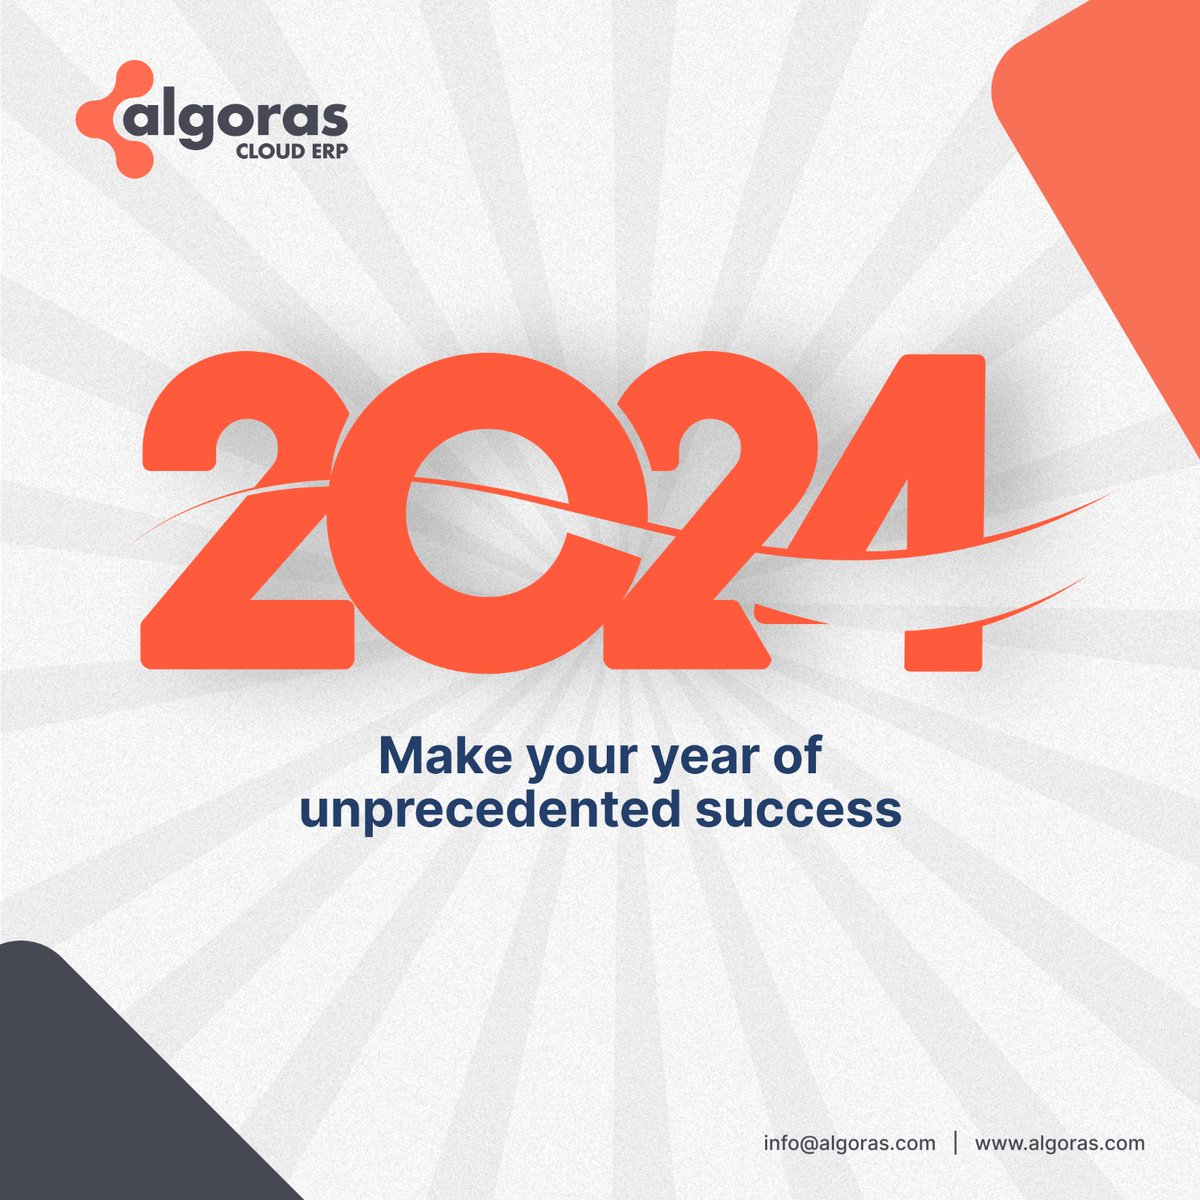 🎉🌟 Jumpstart the #newyear with #success and #efficiency! 🌟🎉

#newyear2024 #achievegreatness #unlockyourpotential #EfficiencyUnleashed #CollaborateToSucceed #InnovationInspiresSuccess #AmbitiousGoals #SuccessIn2024 #AlgorasCloudERP